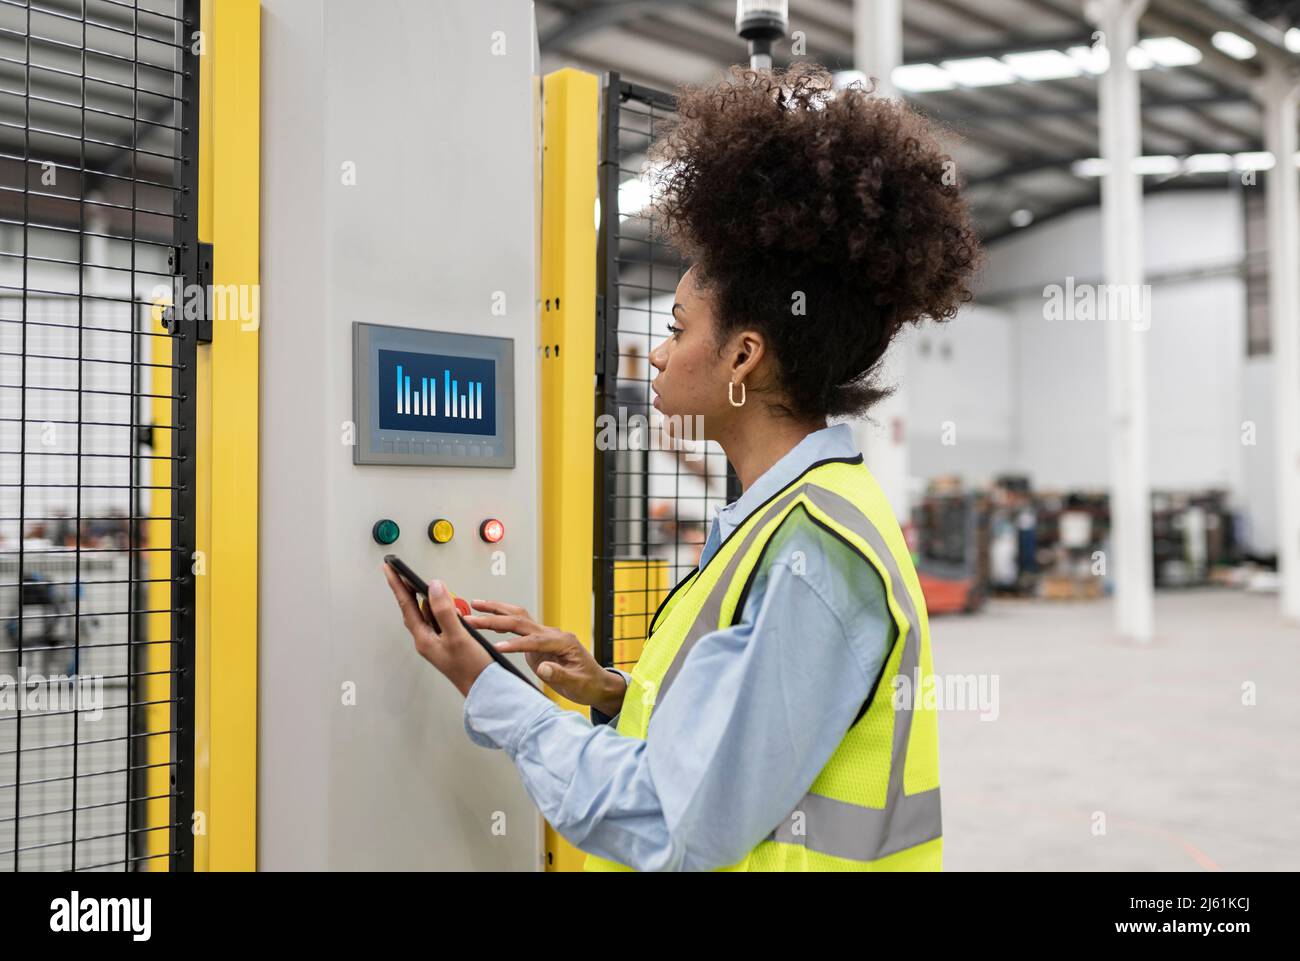 Engineer unlocking security system through tablet PC in factory Stock Photo